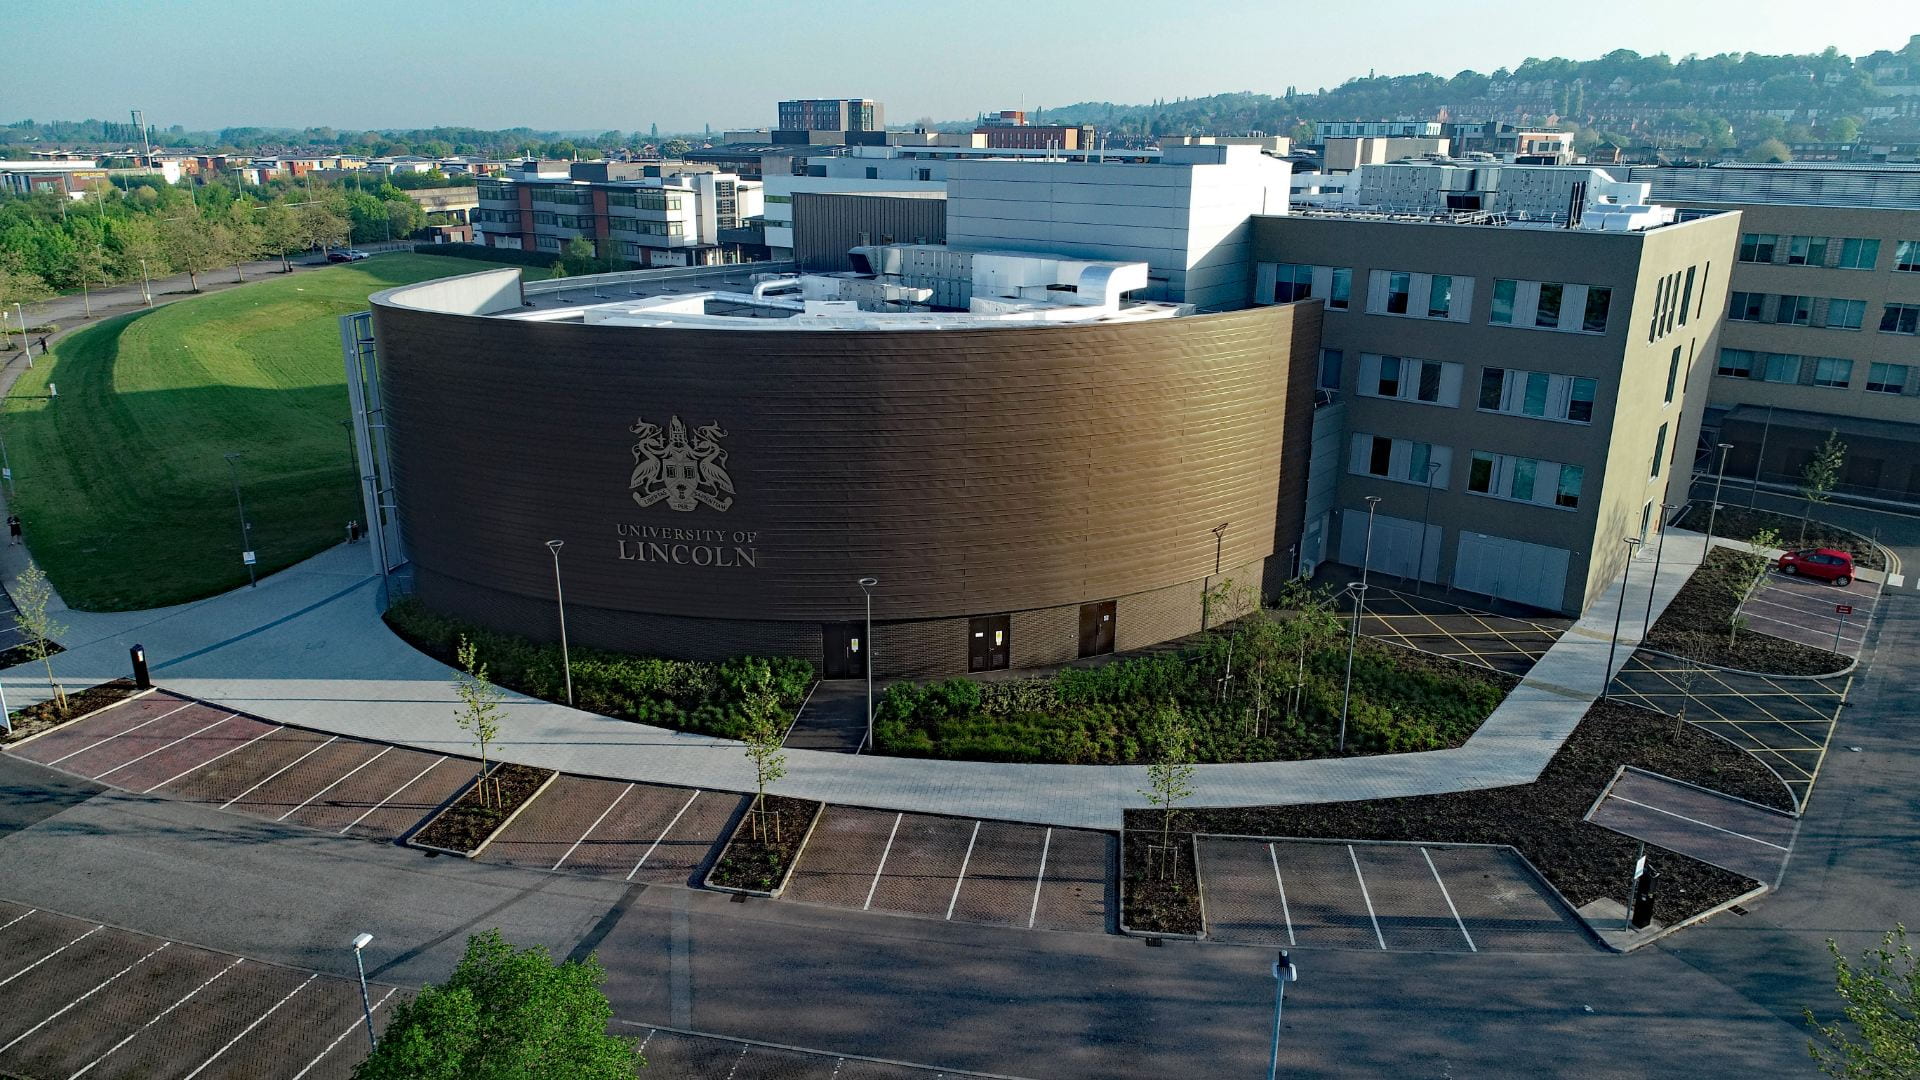 Image of a large curved building from above